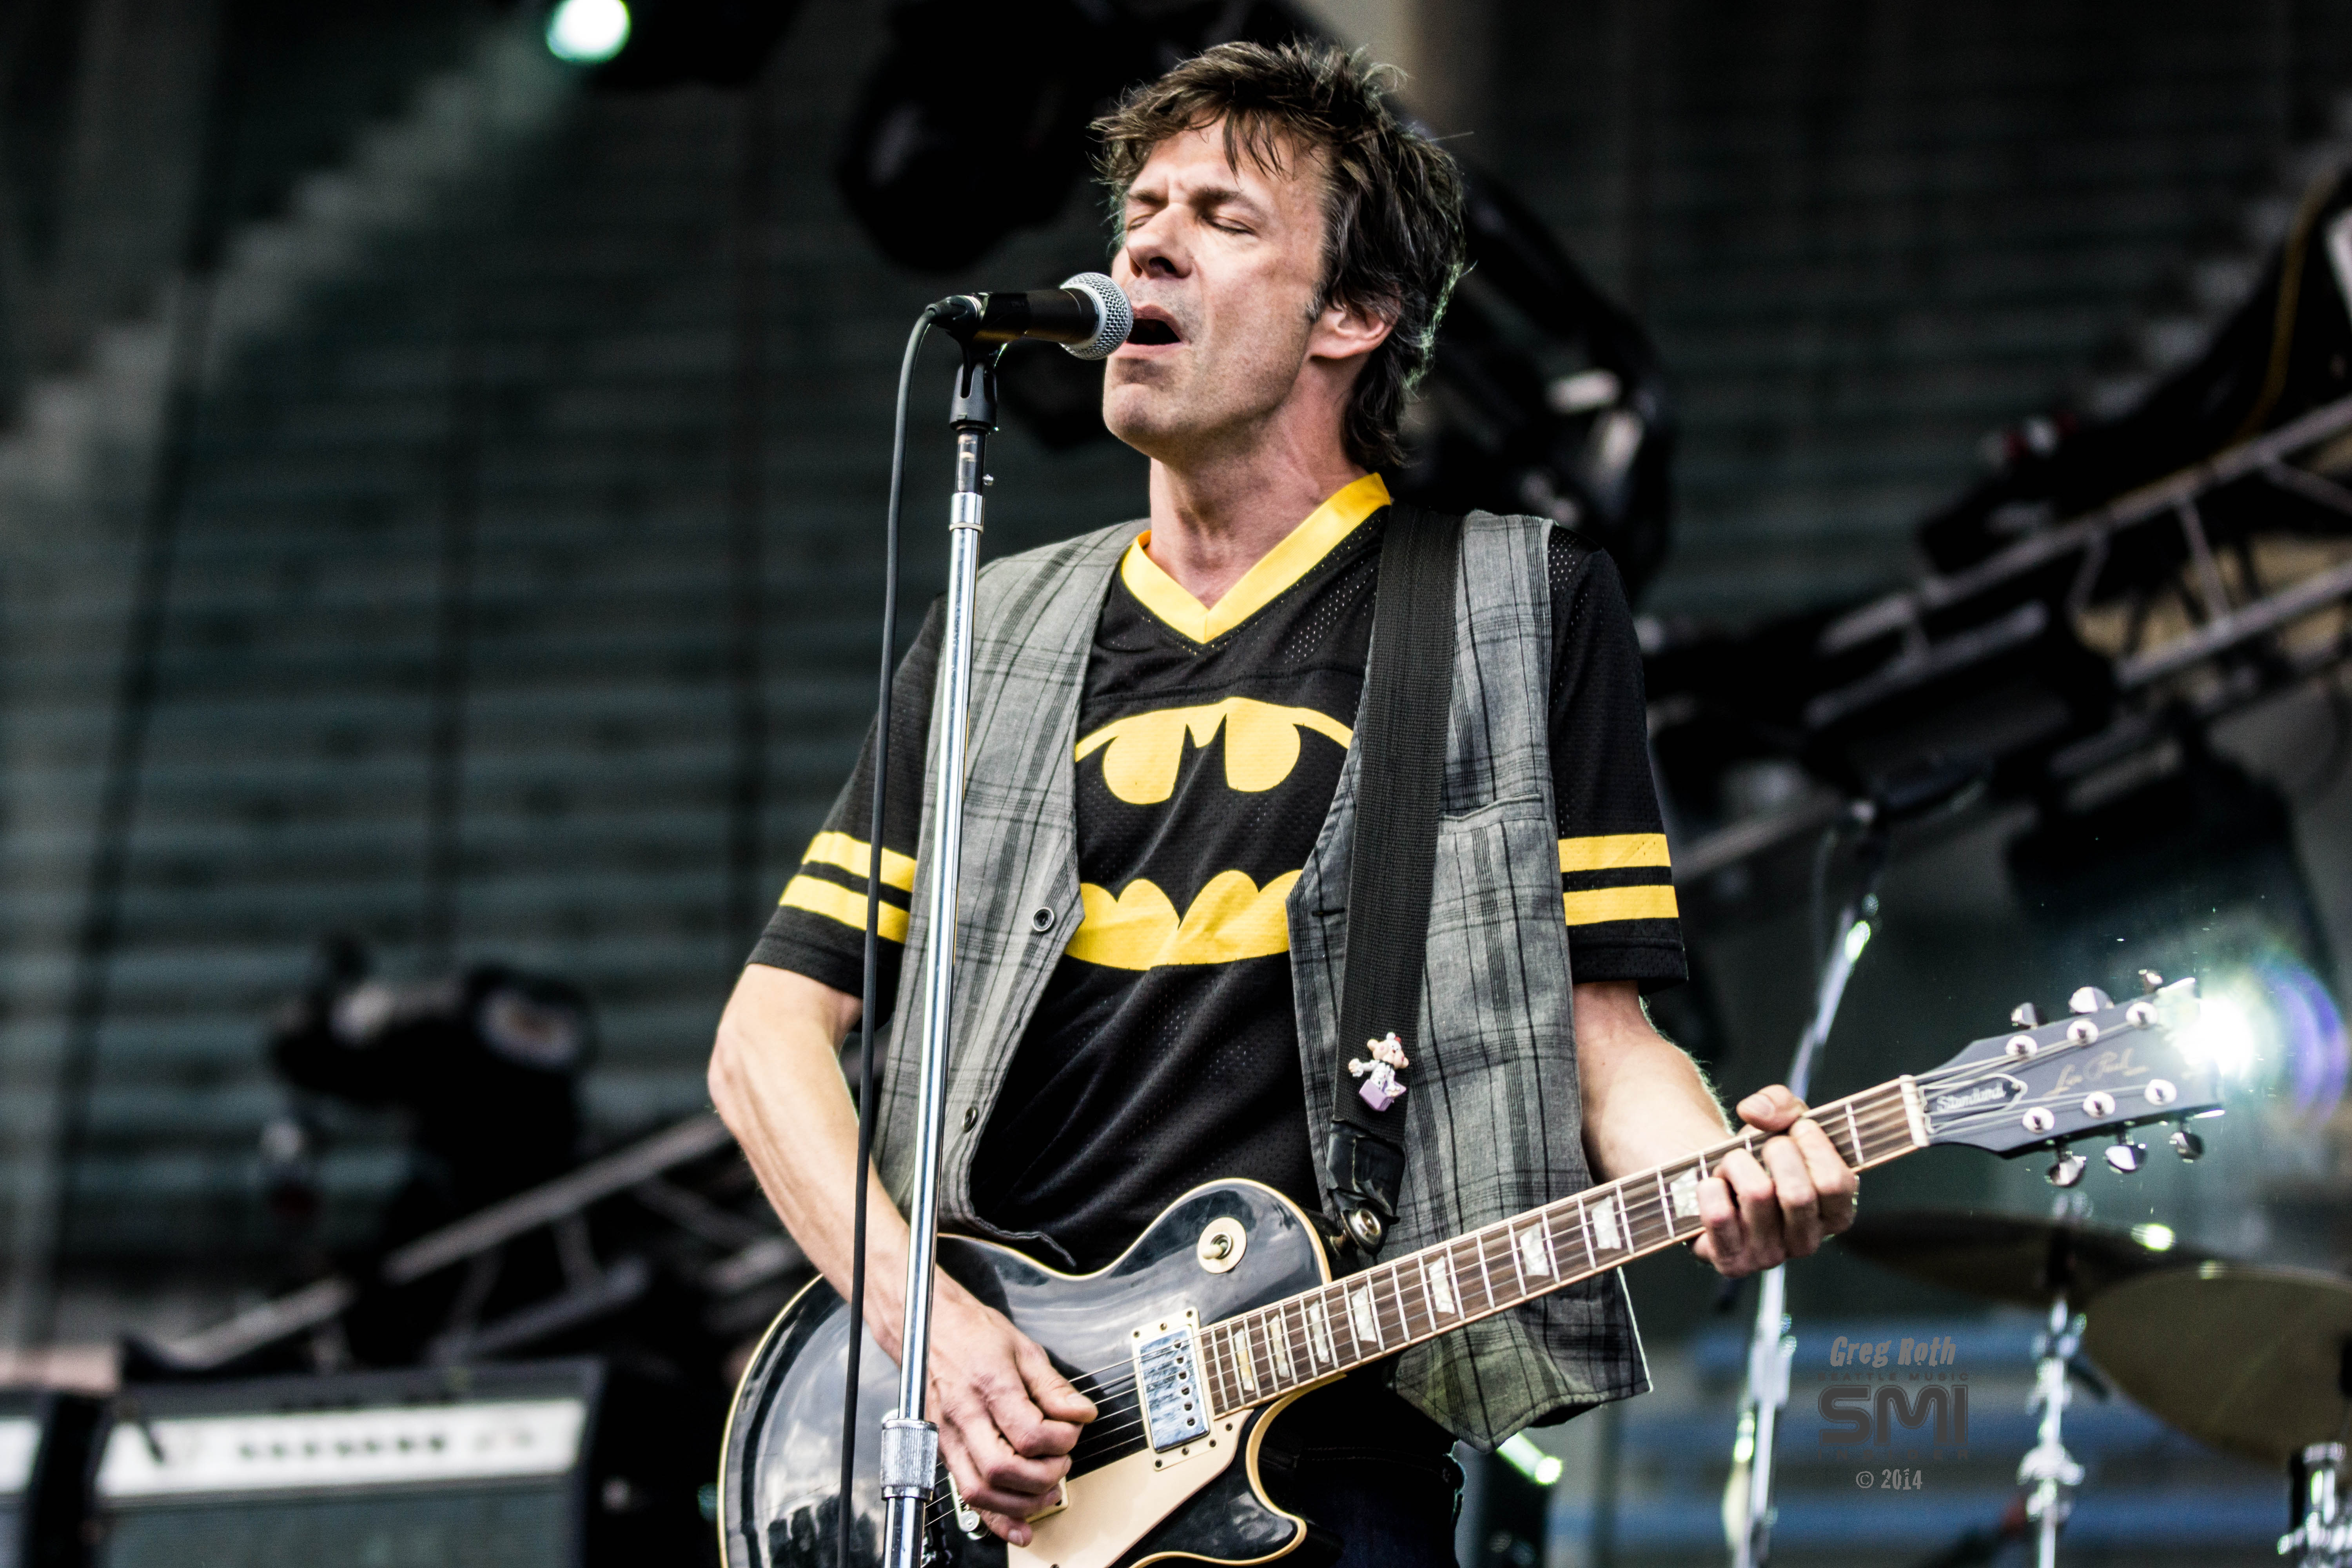 The Replacements Live @ Bumbershoot 2014 (Photo by Greg Roth)